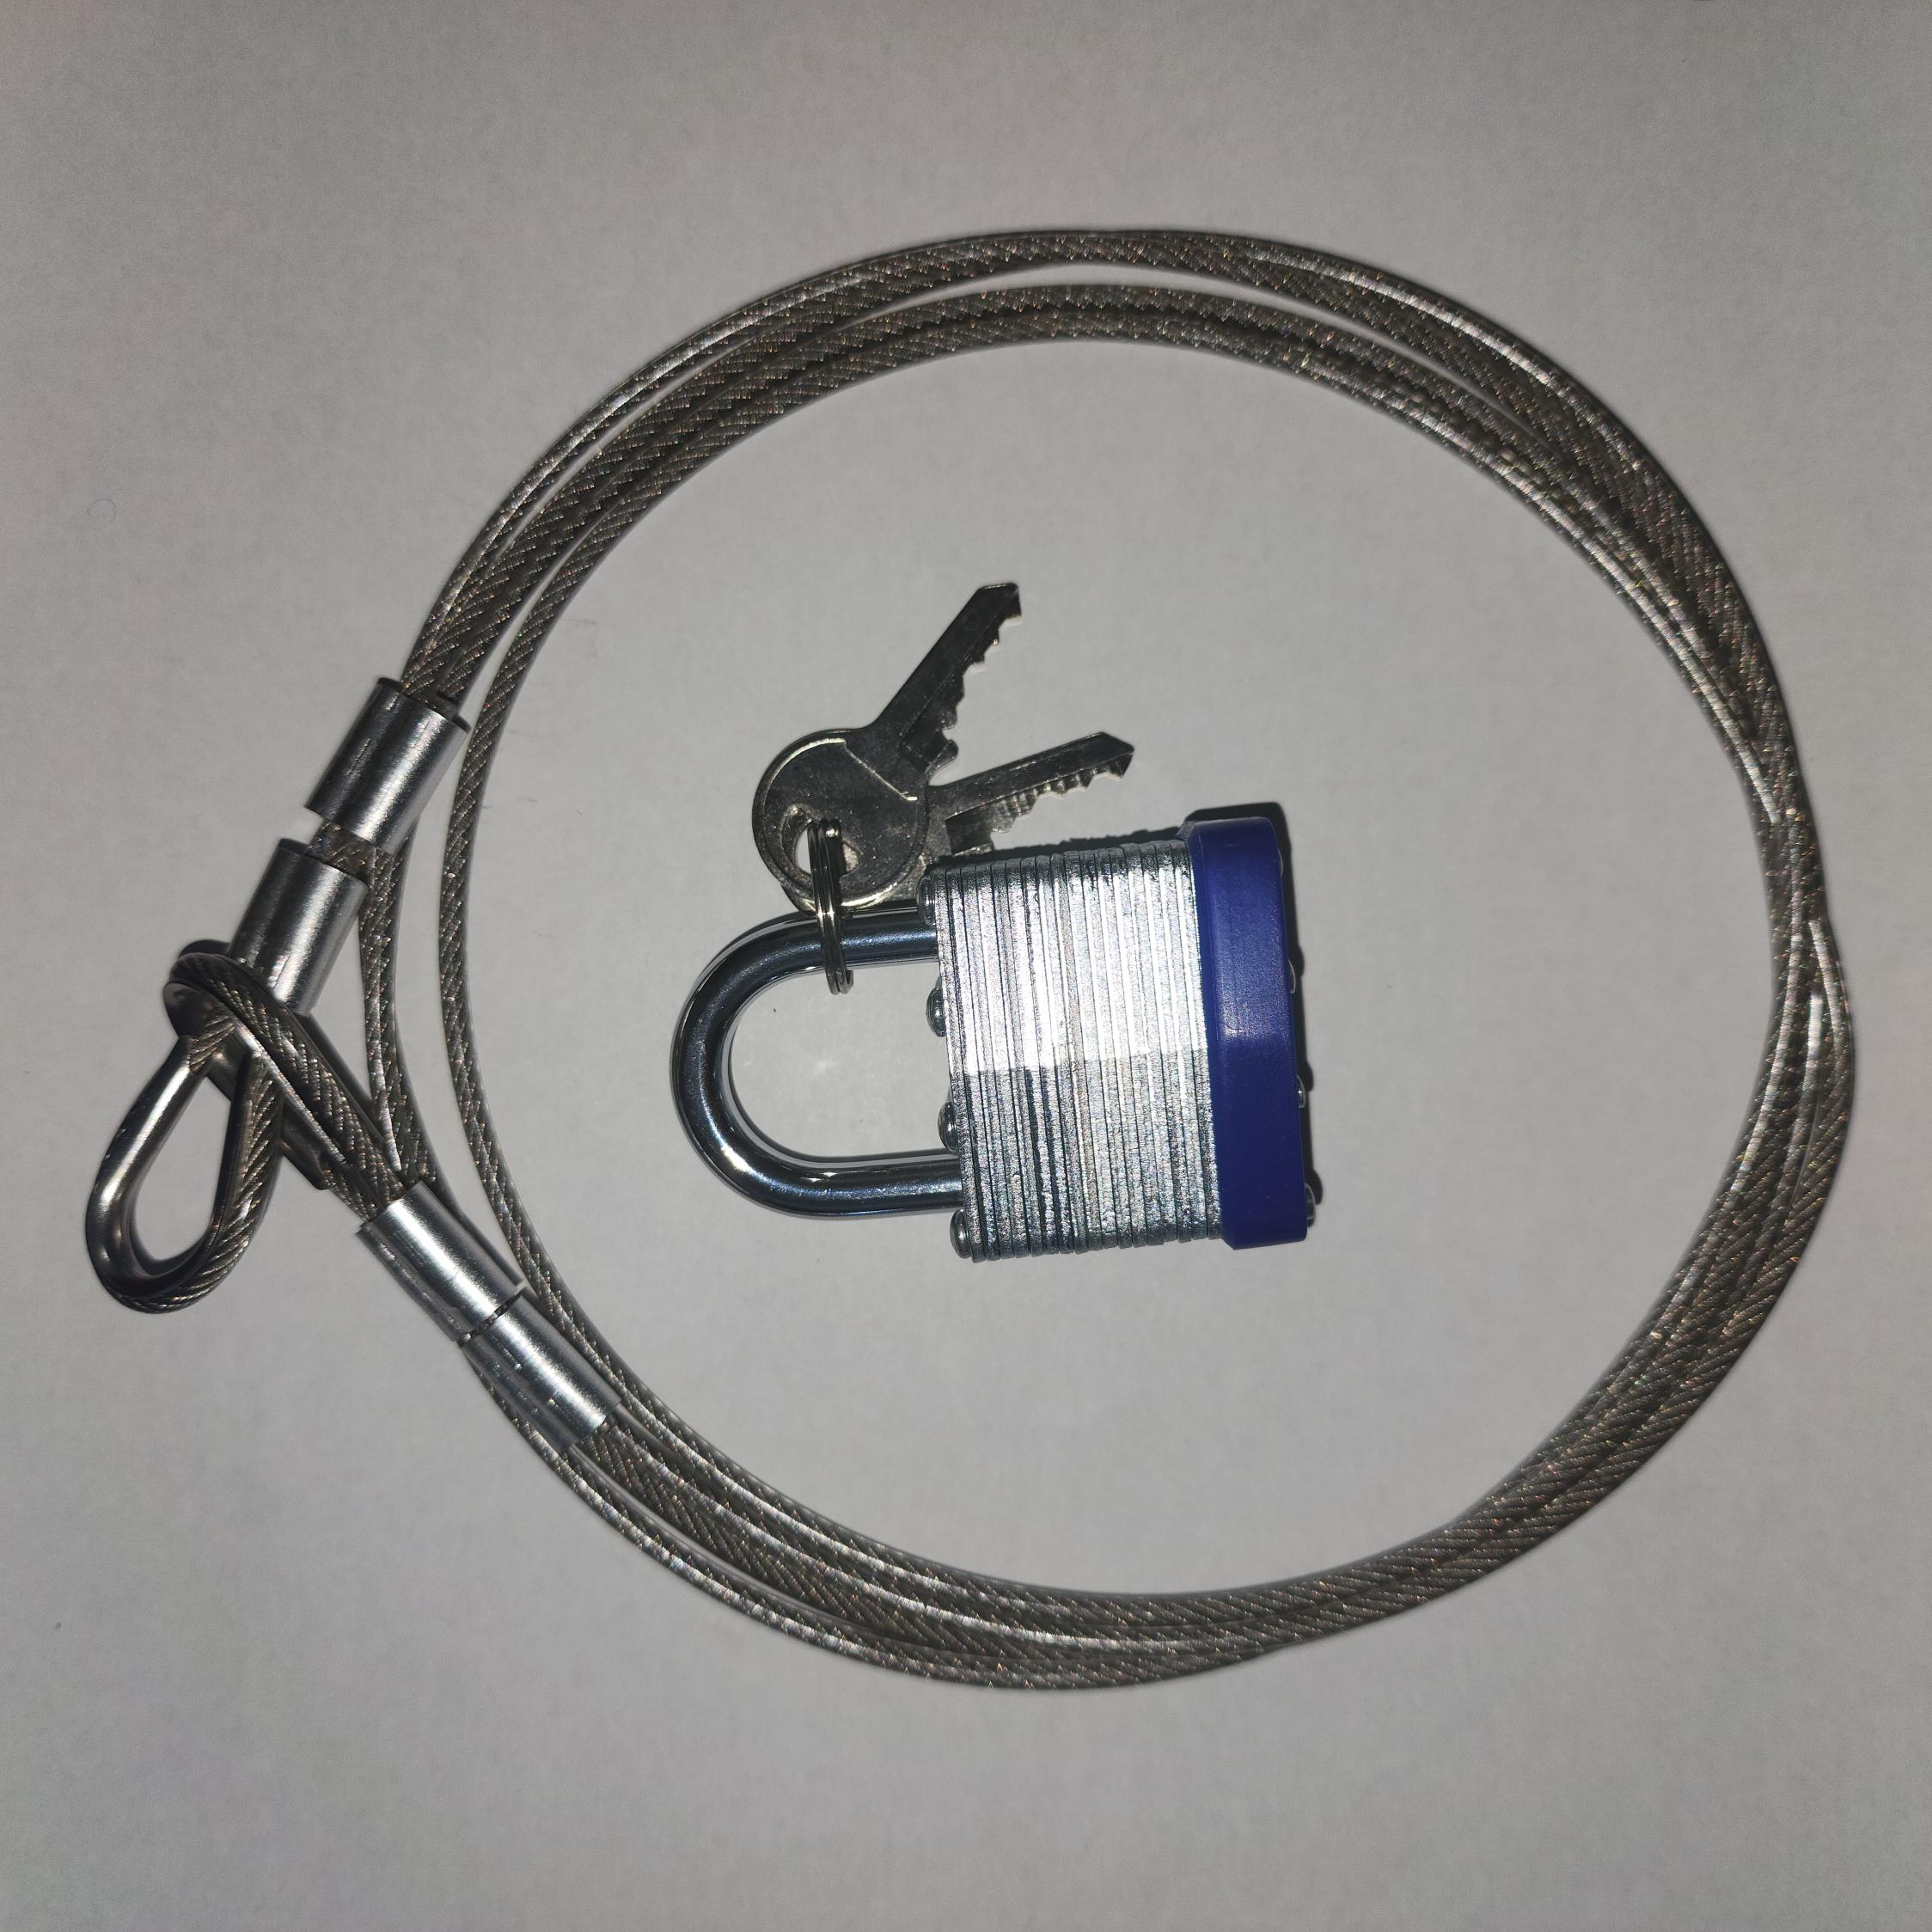 Lesstor Cable & Lock